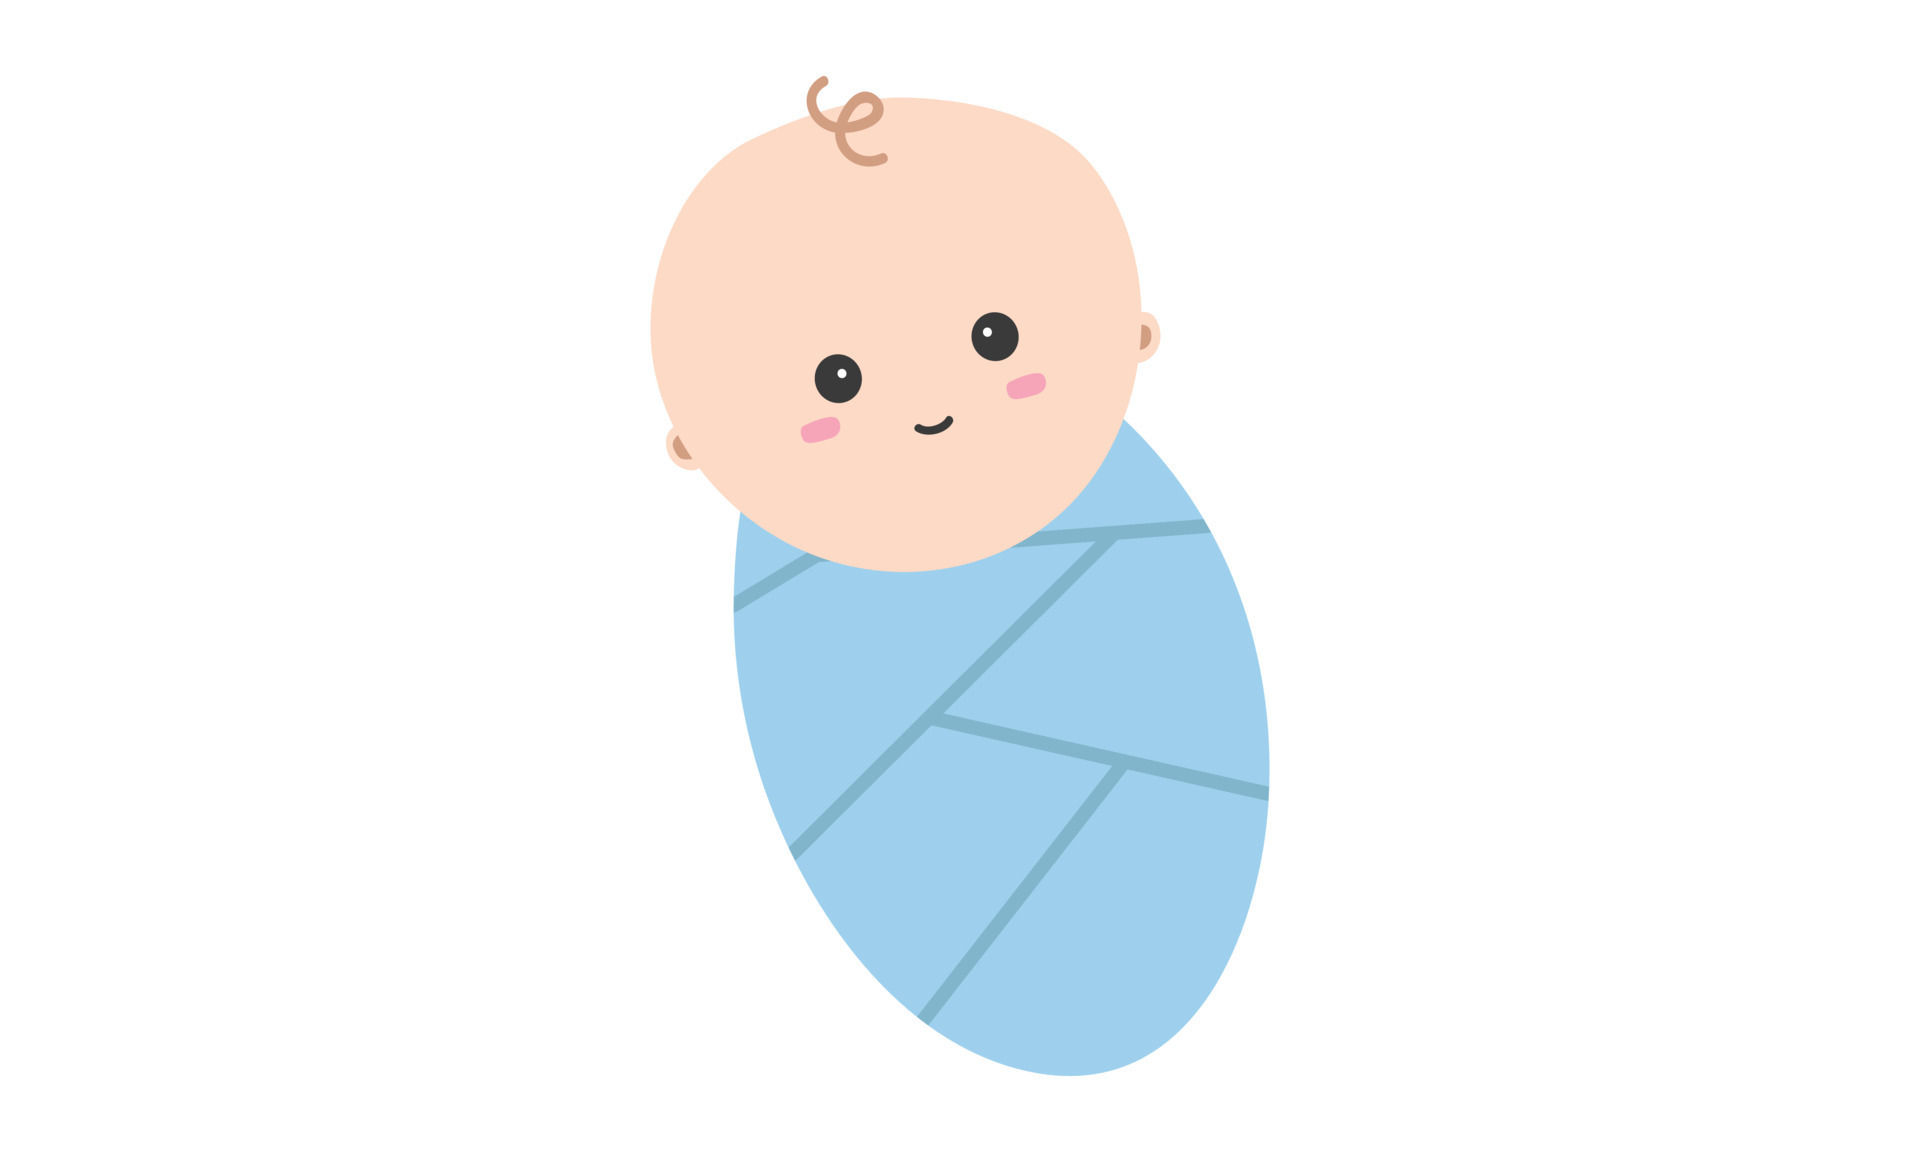 Smiling baby swaddle clipart. Simple cute smile baby swaddle in blue wrap  flat vector illustration. Happy infant baby swaddling cartoon style. Kids,  baby shower, newborn and nursery decoration concept 13740512 Vector Art